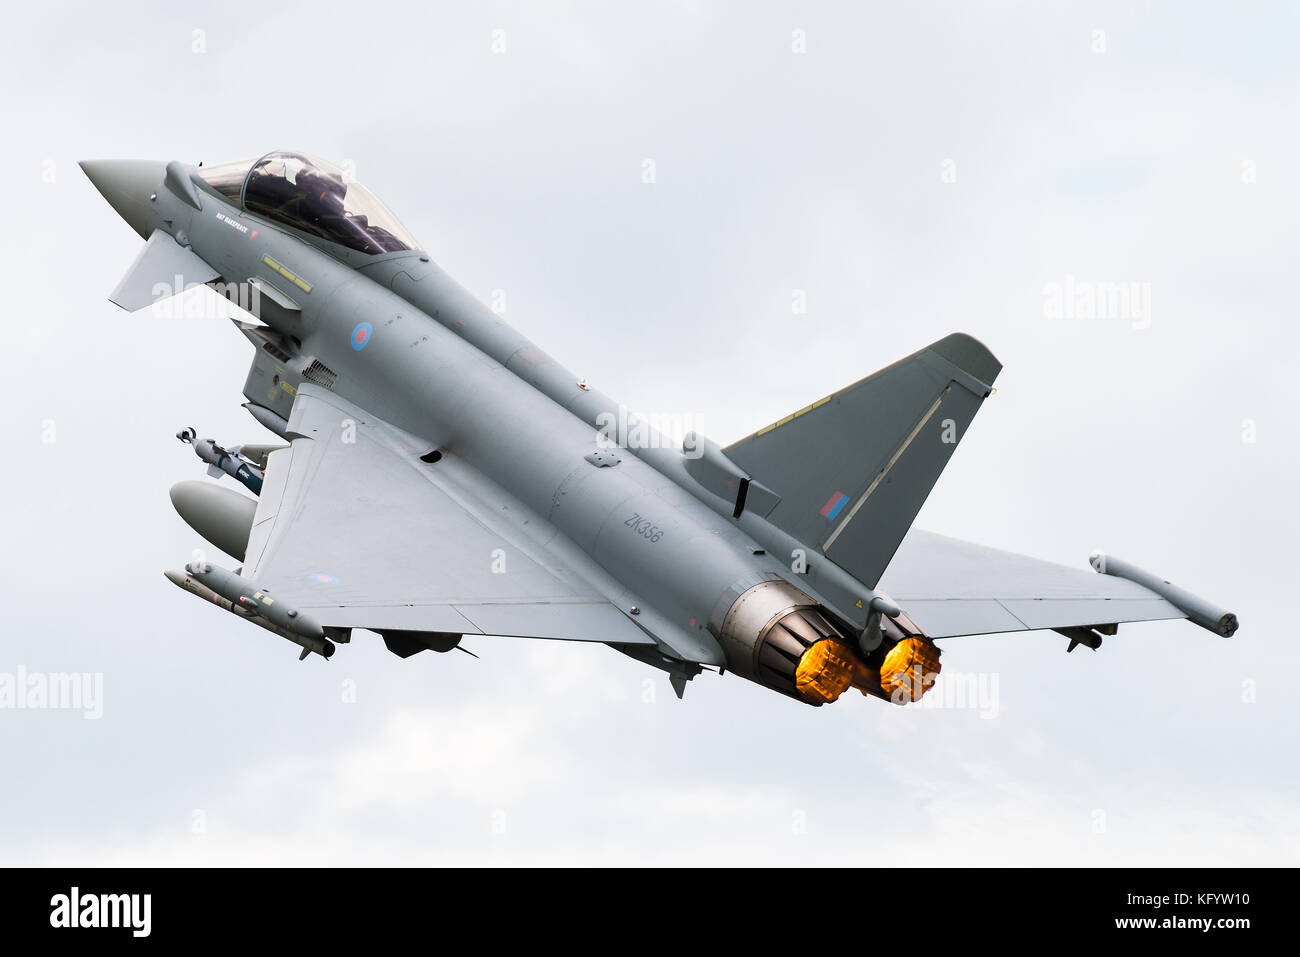 A Eurofighter Typhoon twin-engine fighter jet of the Royal Air Force at RAF Fairford. Stock Photo